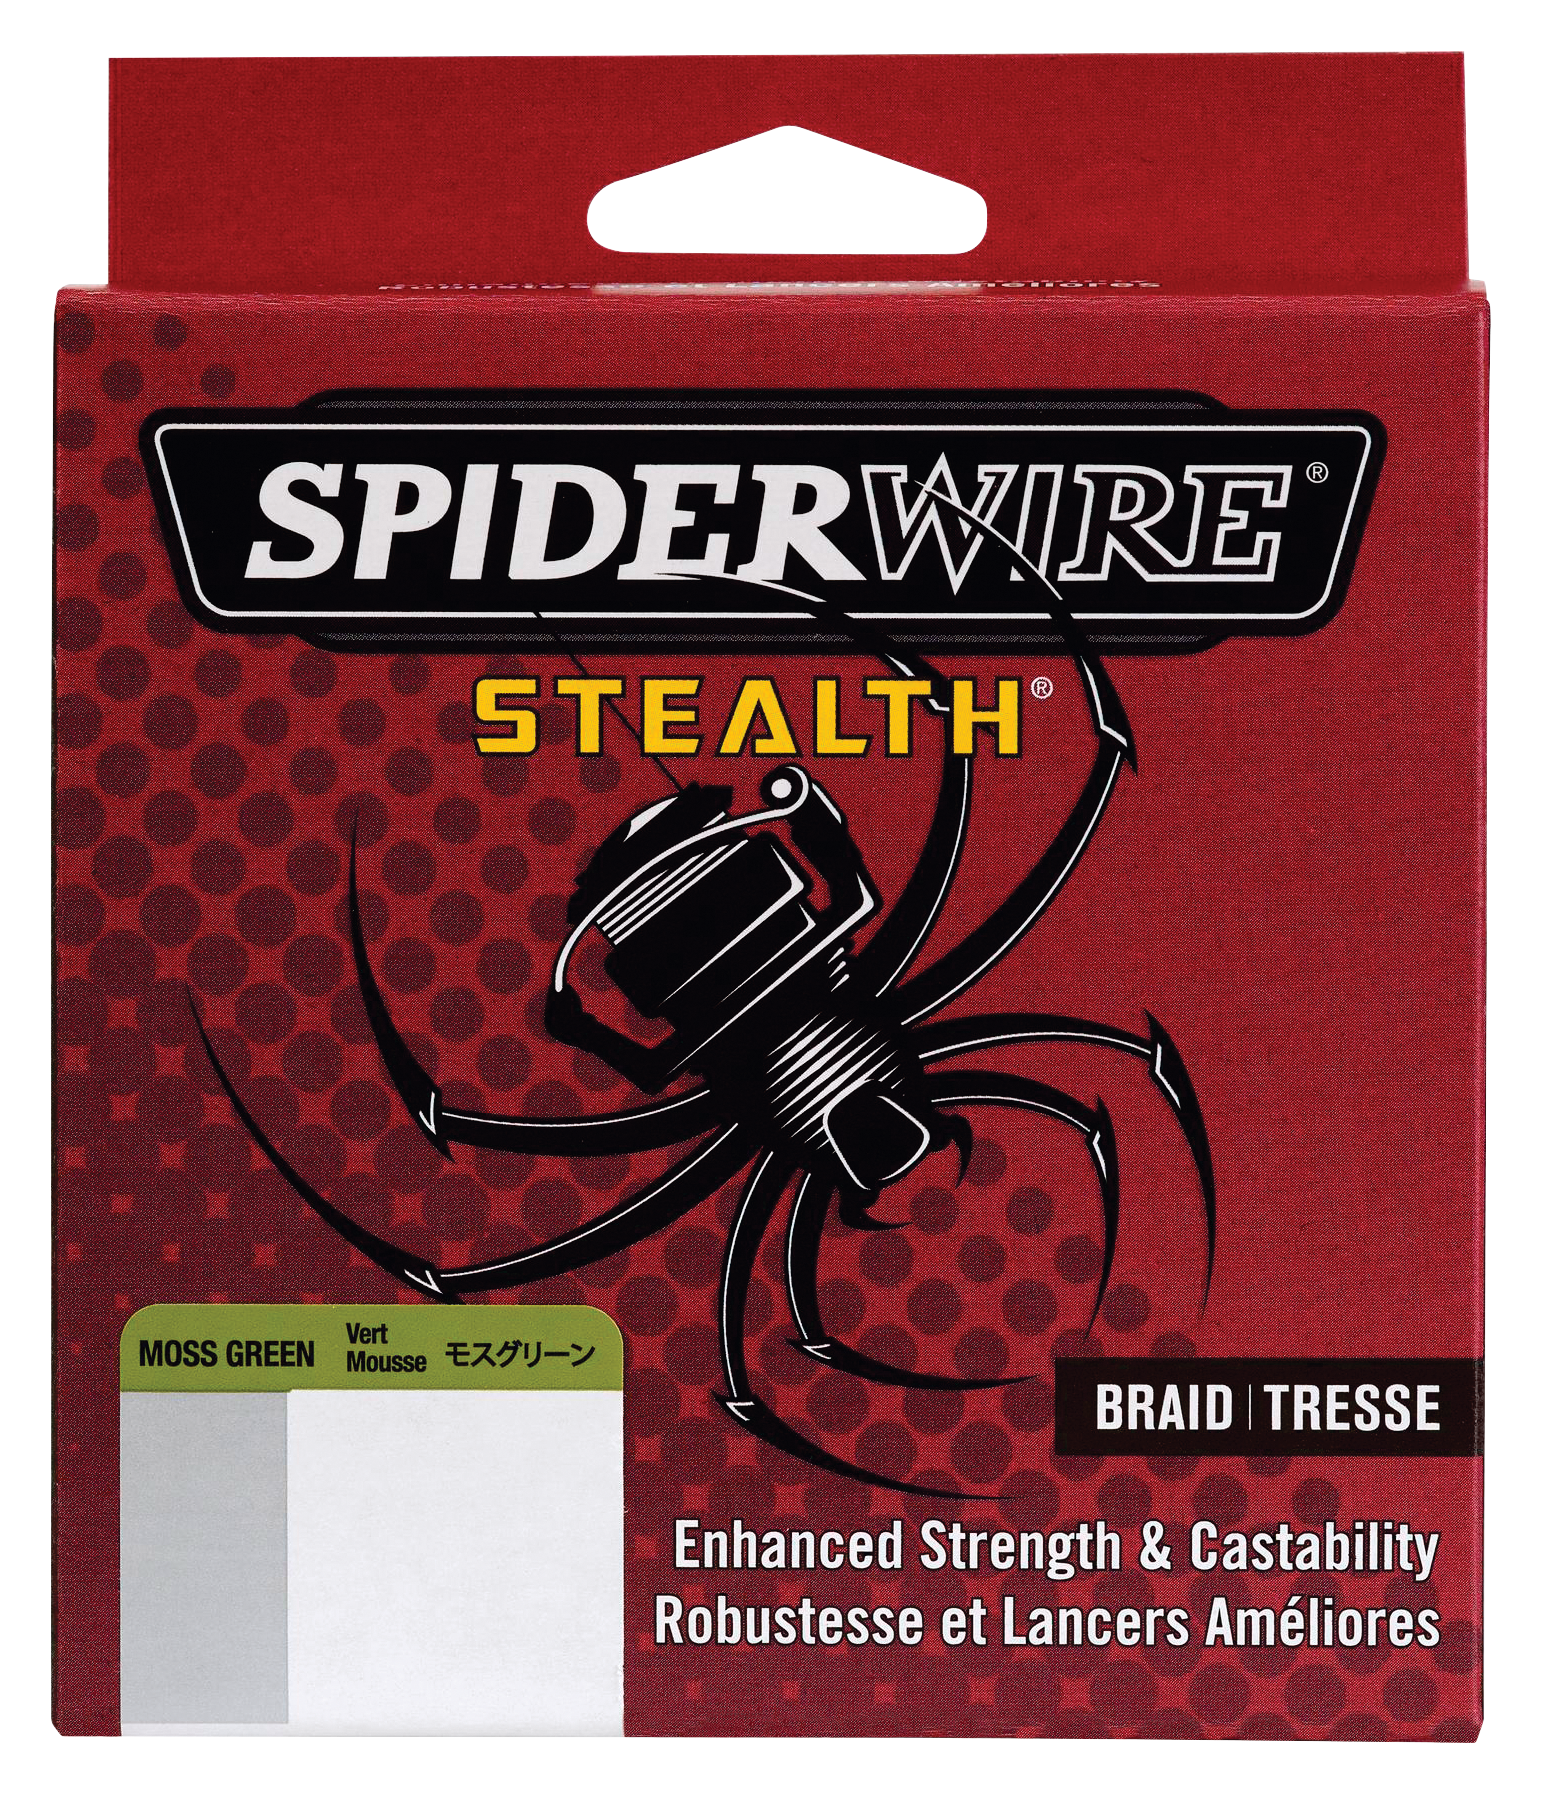 SpiderWire Stealth-Braid 65lb Translucent 114m Fishing Line-Brand  New-SHIP24HRS